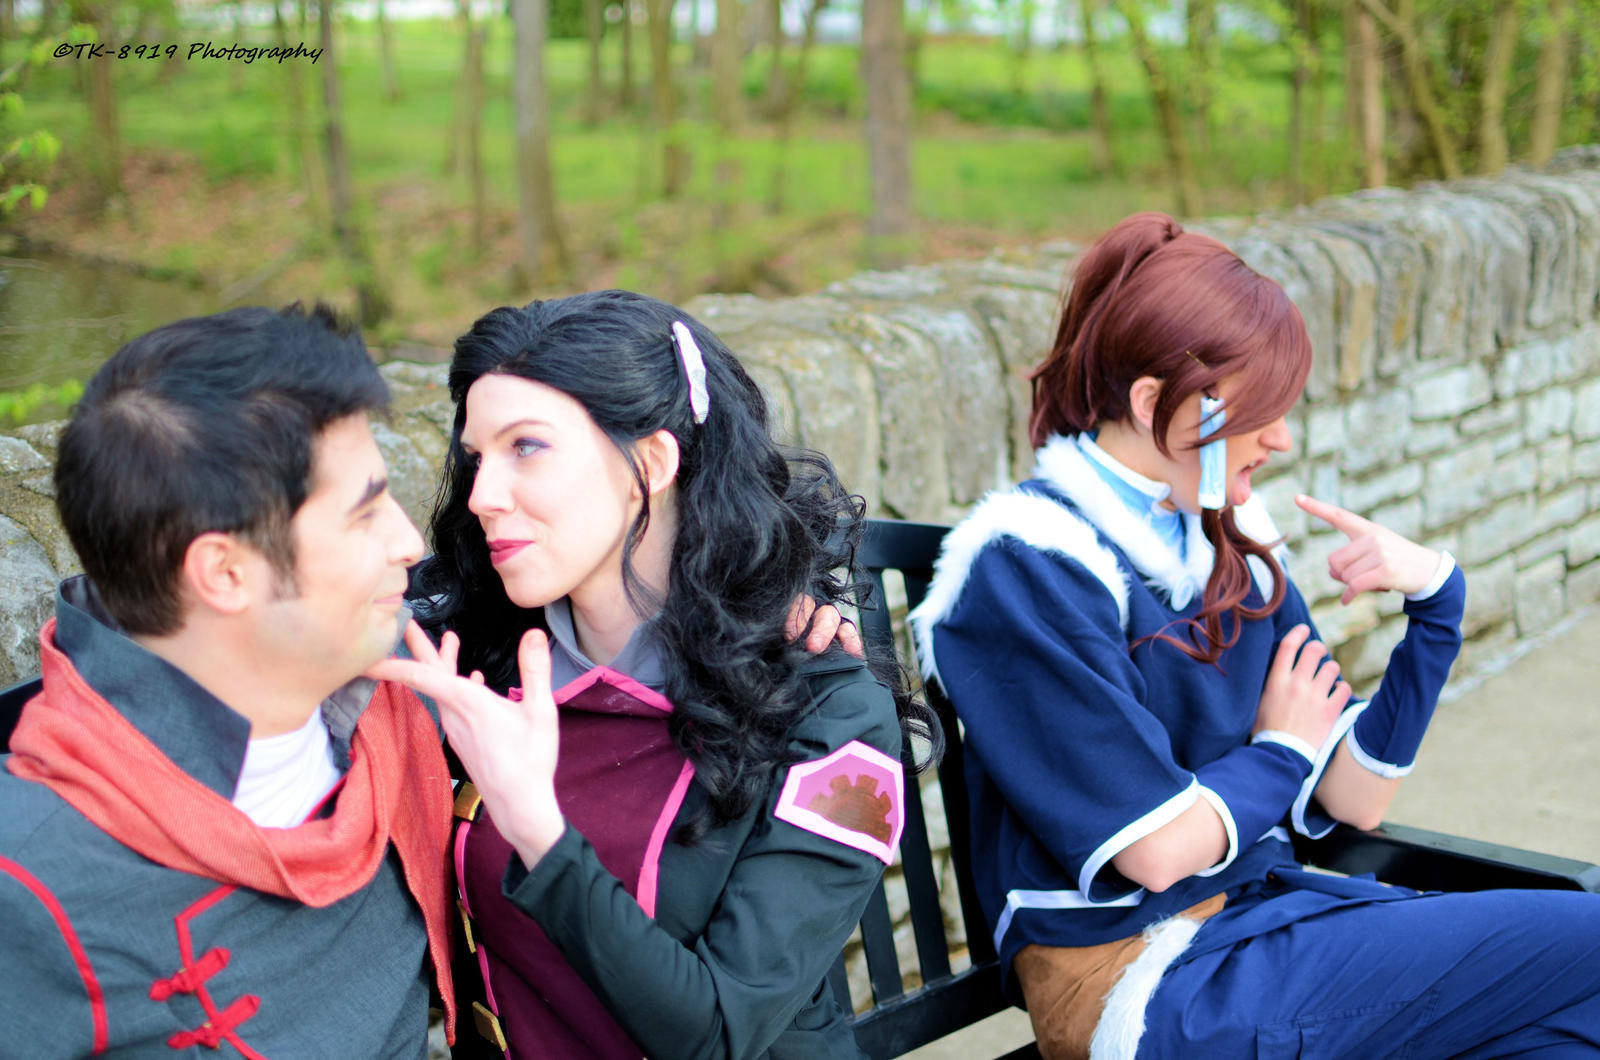 Korra does not approve